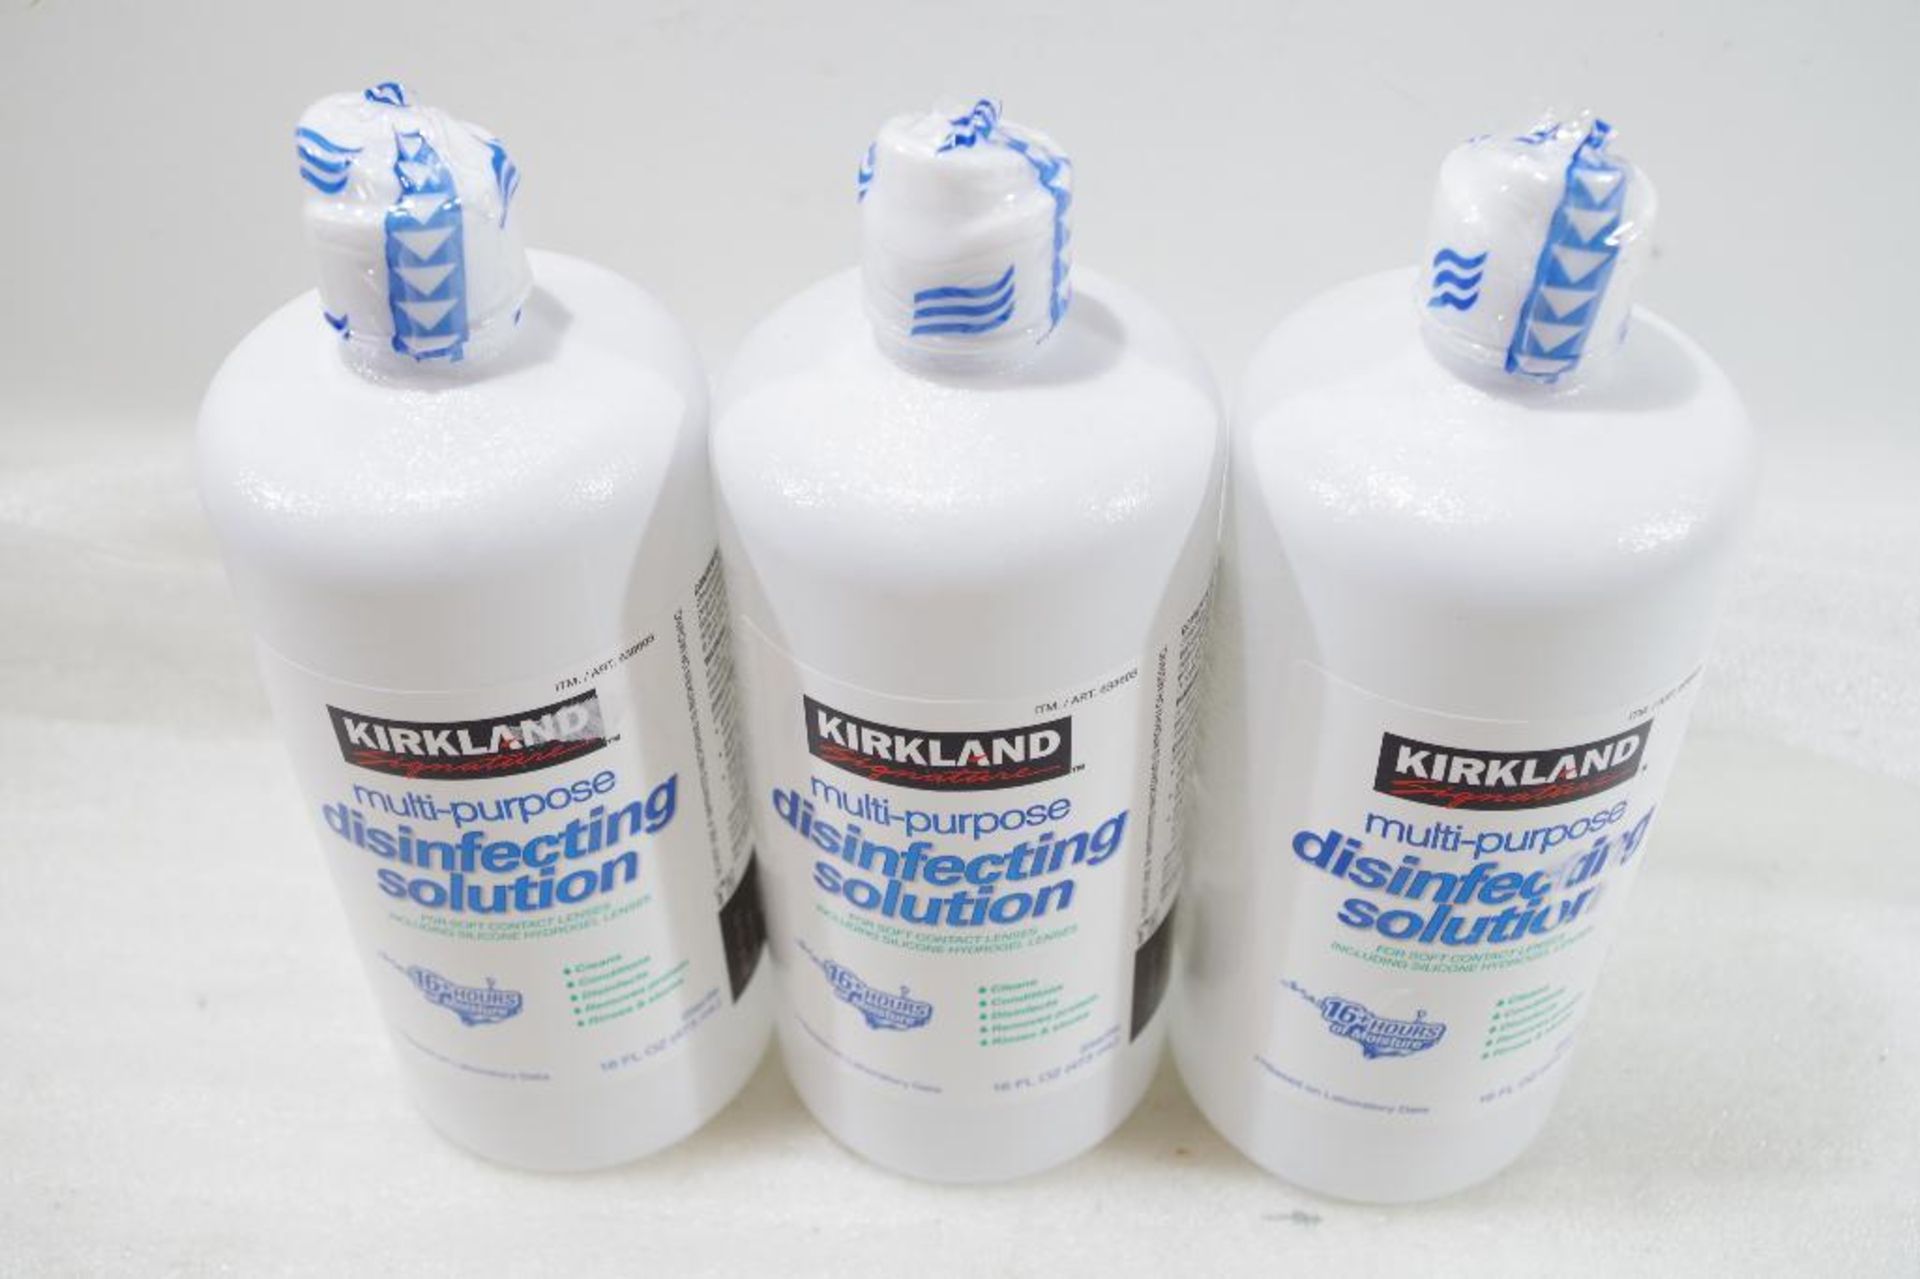 [3] KIRKLAND Multi-Purpose Disinfecting Solution for Soft Contact Lenses - Image 3 of 3